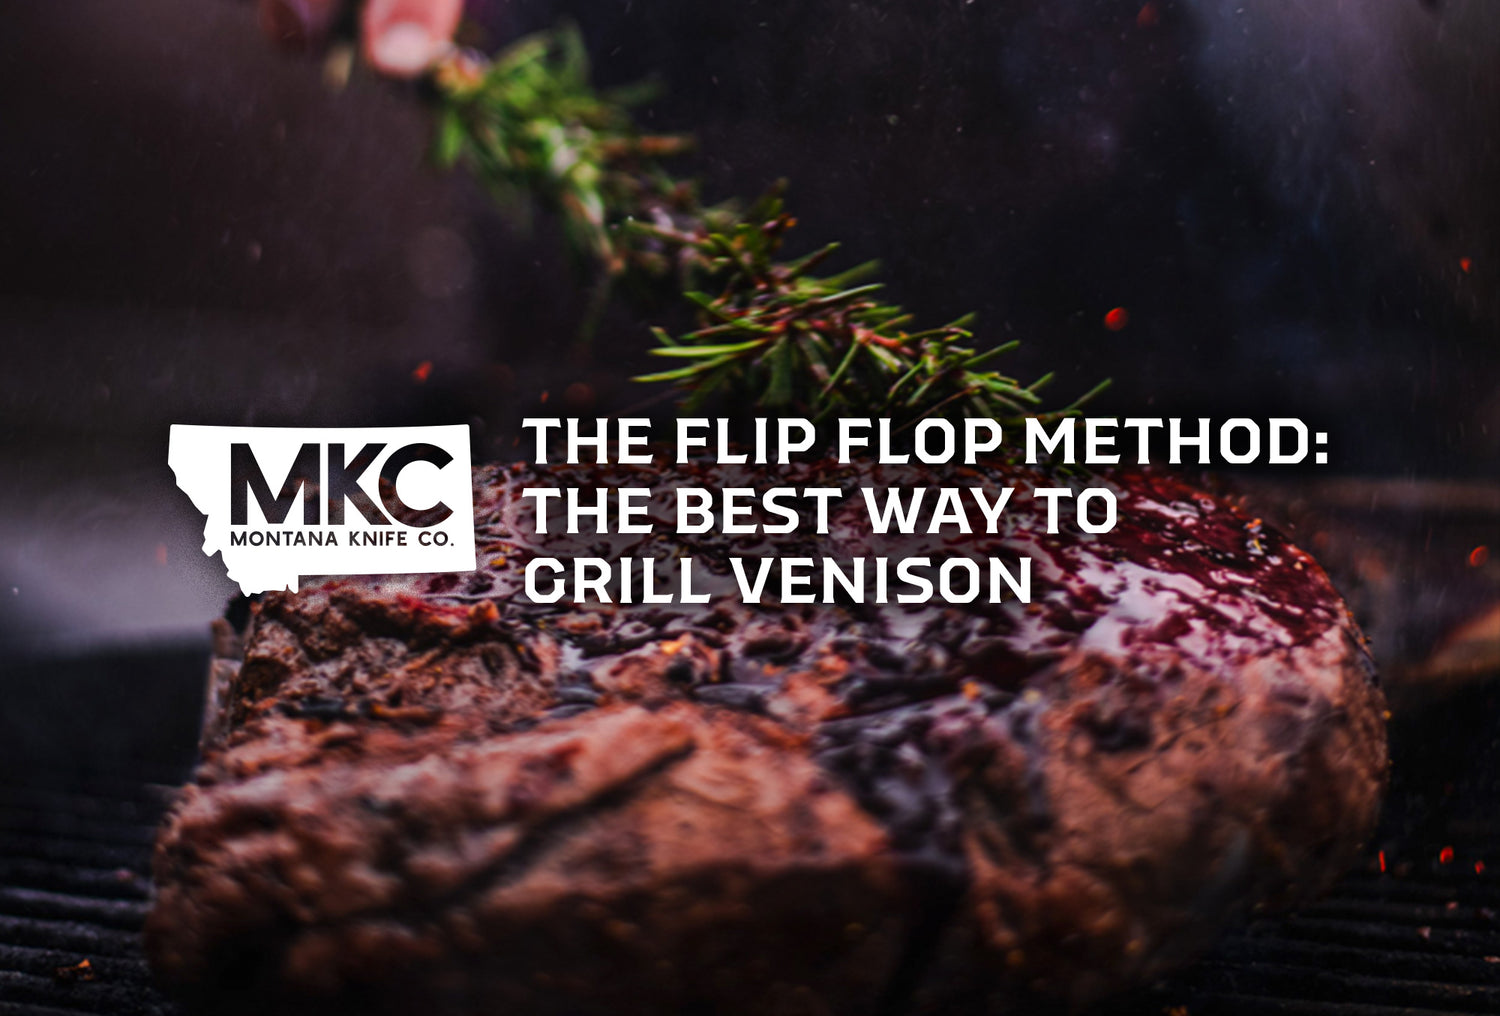 A rosemary mop bastes a venison leg on a hot grill for a grilling technique known as the flip flop method.